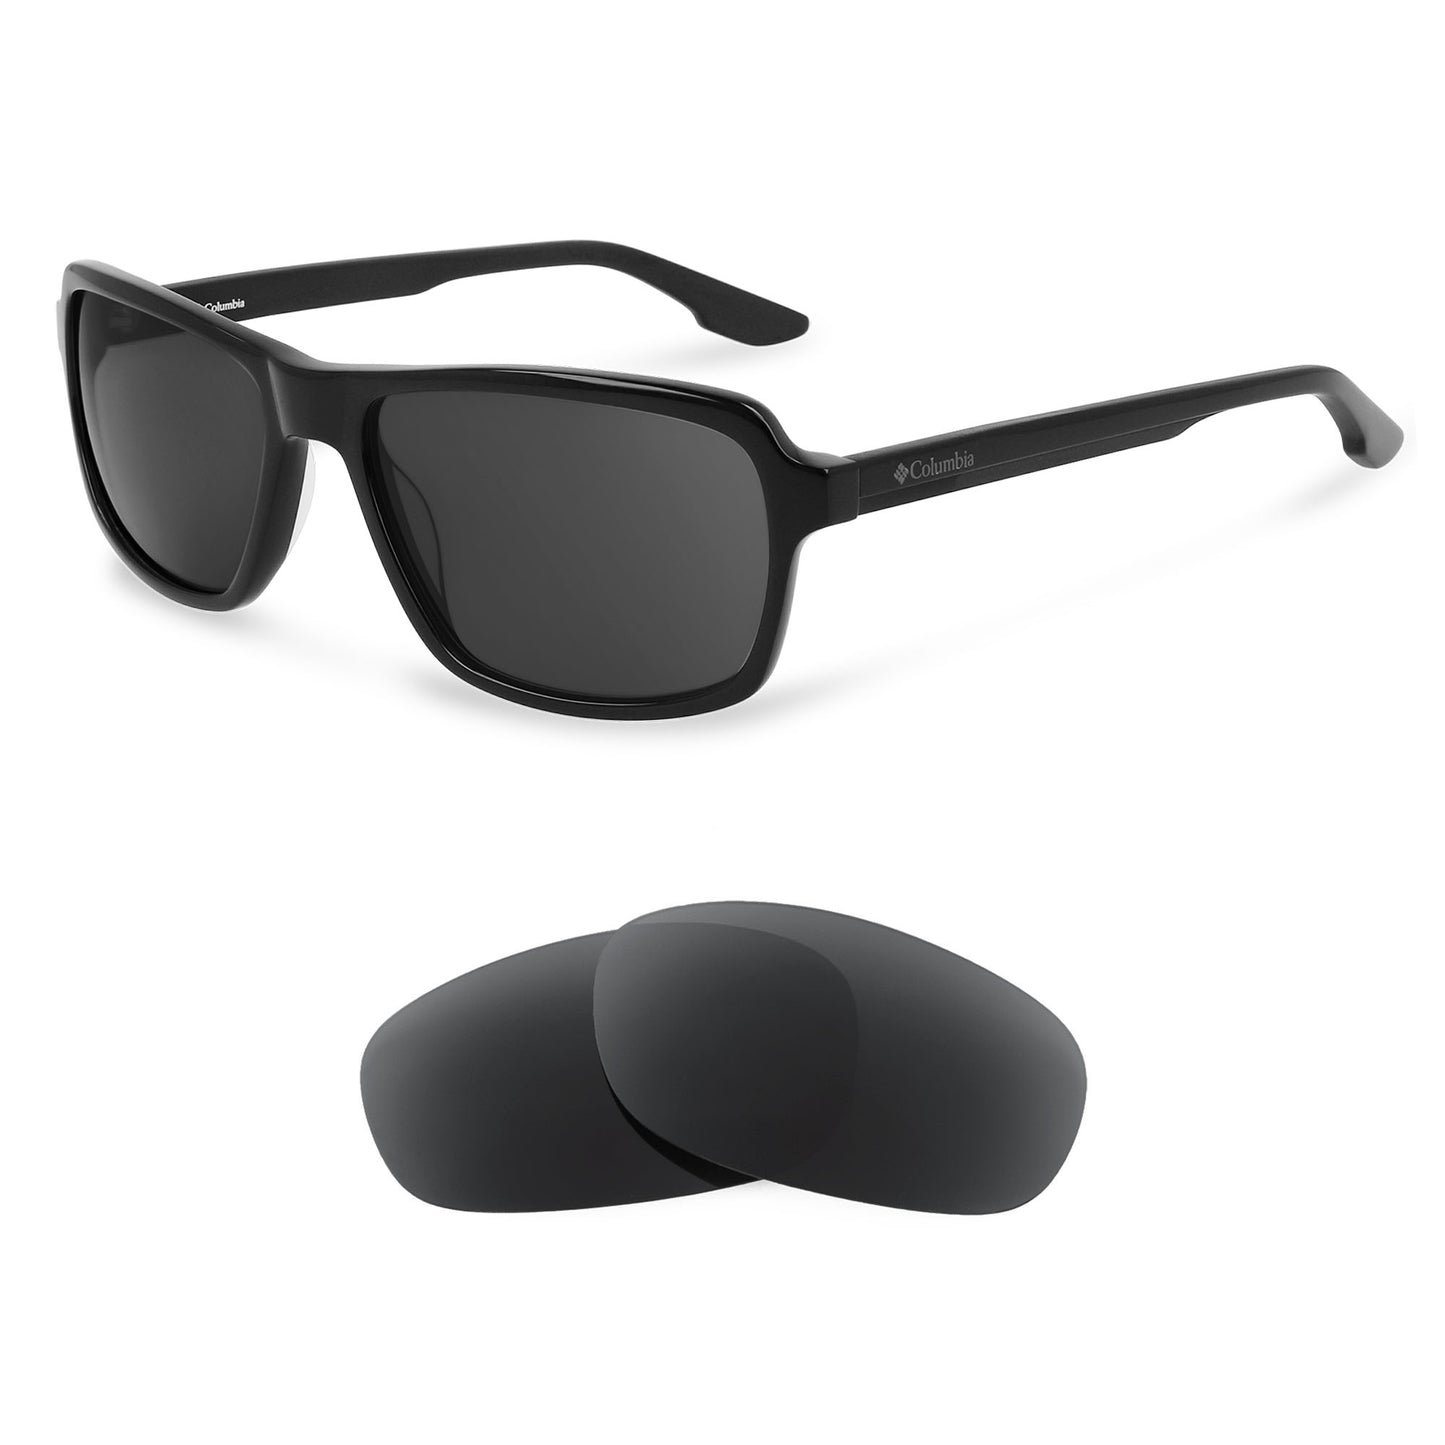 Columbia C562S sunglasses with replacement lenses